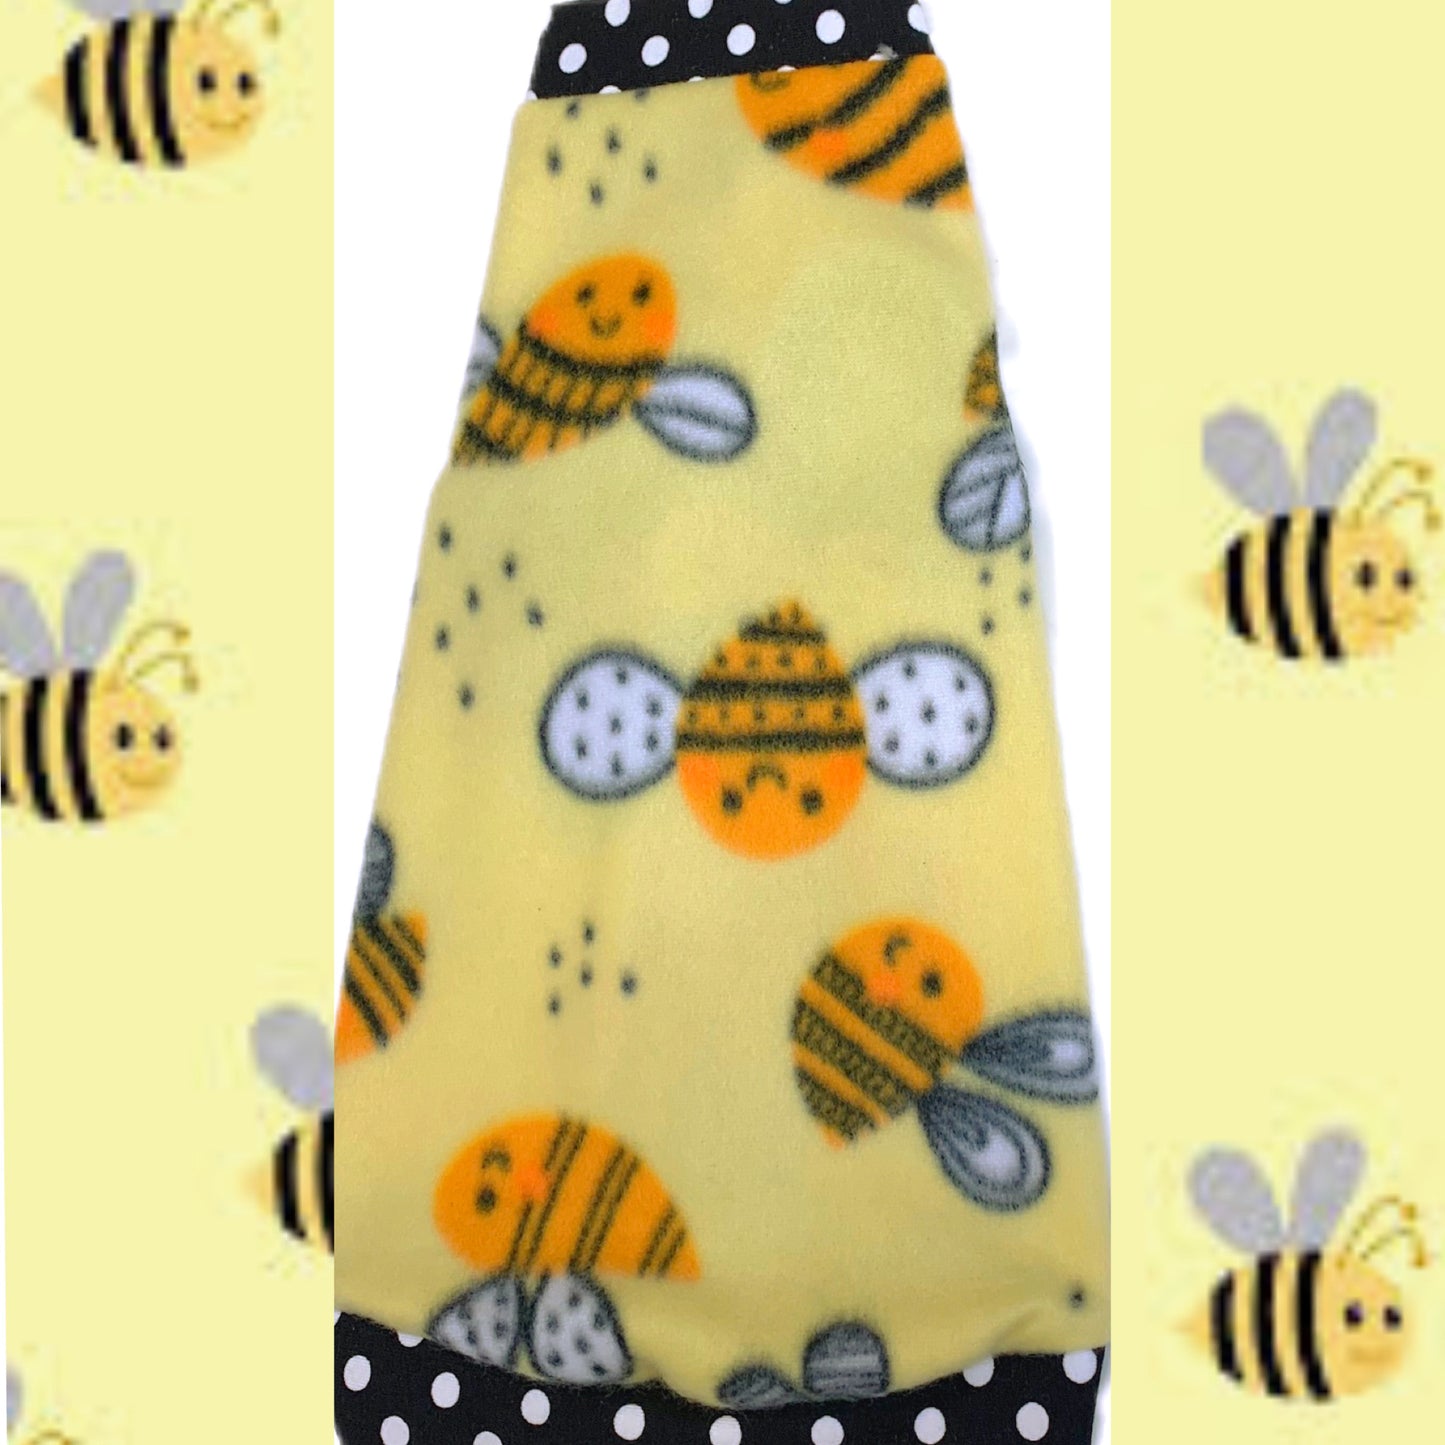 Bees & Dots on Yellow Fleece "Buzzing Bumble Bees"